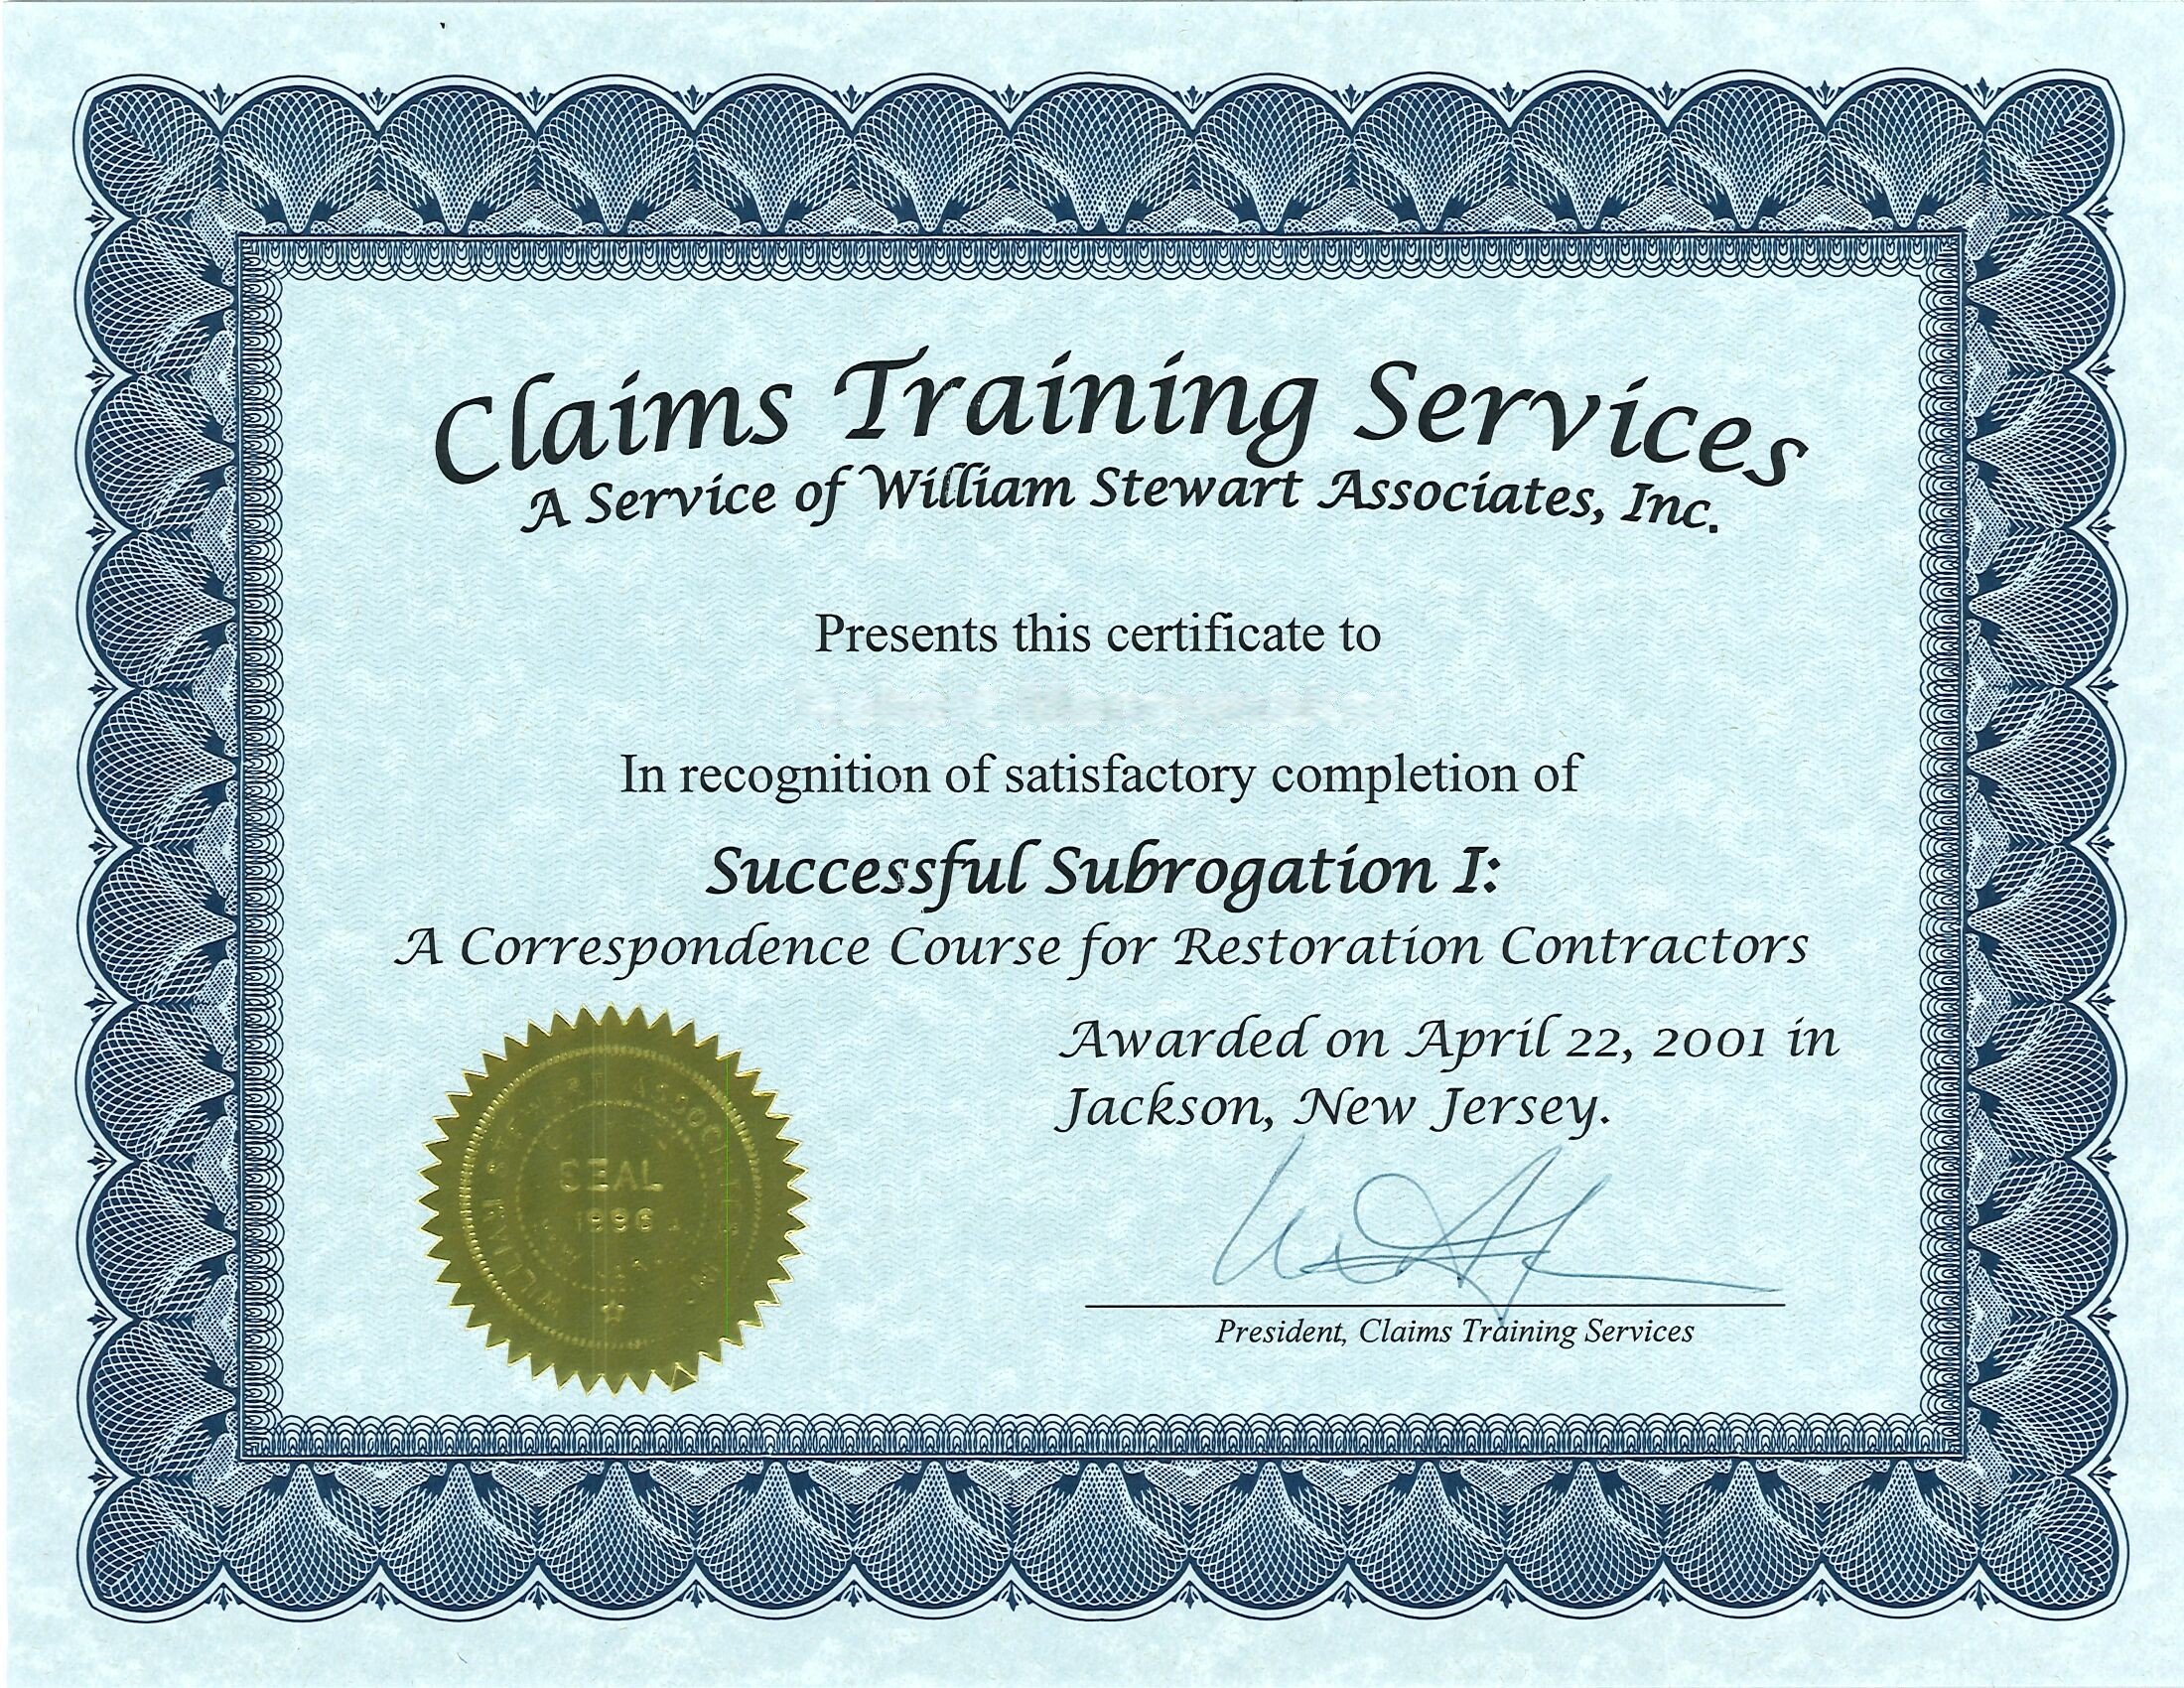 Claims Training Services